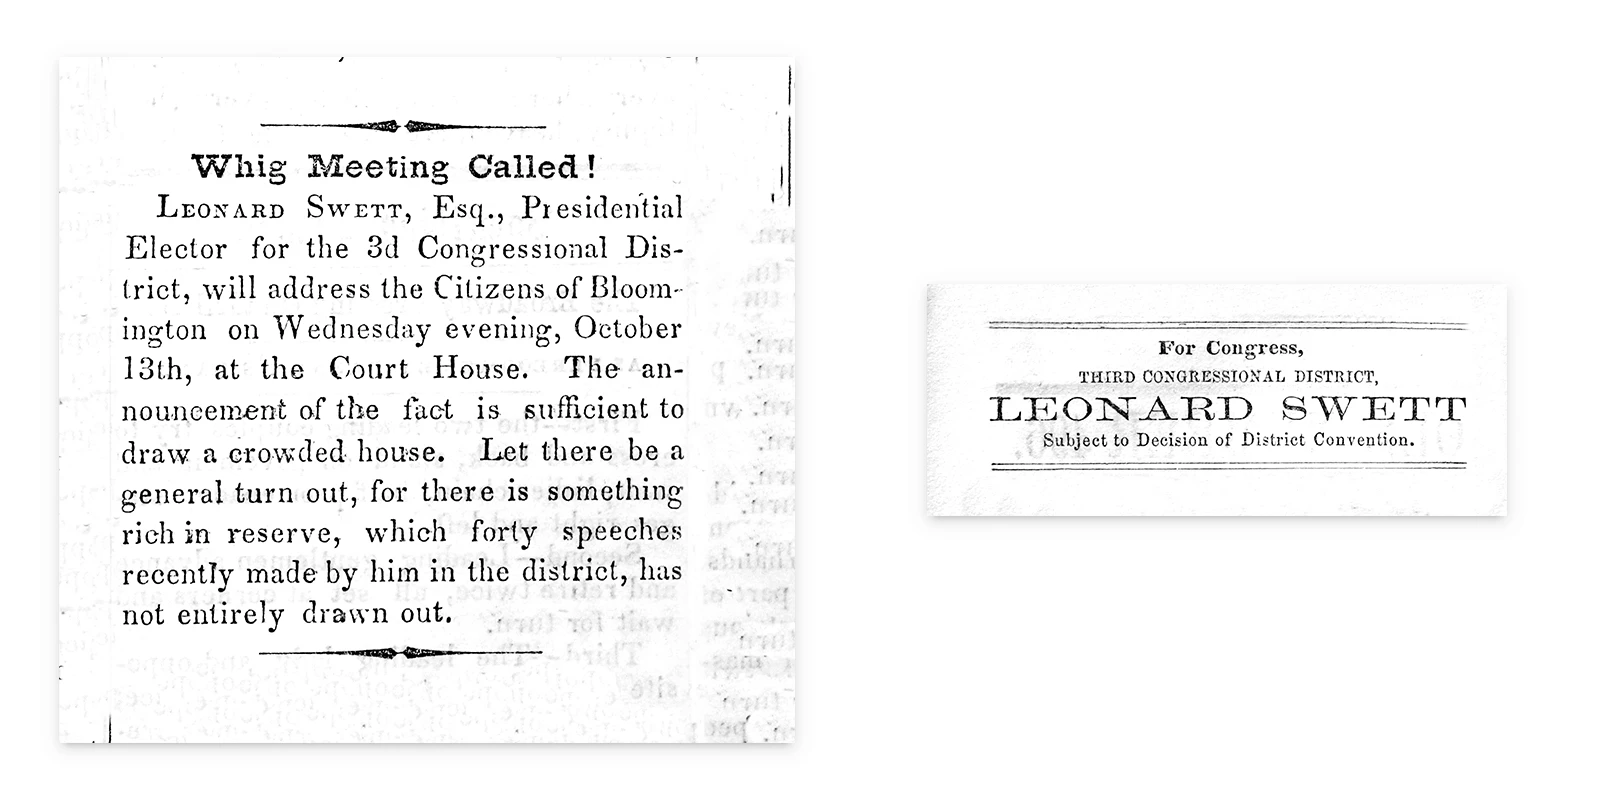 Black and white photo of two newspaper clippings. The first, from the Bloomington Intelligencer, reads Whig meeting called! And gives details on Swett’s Wednesday evening court house address to the citizens of Bloomington. The second, from the Bloomington Pantagraph is a Sweet campaign notice for Congress, third congressional district.